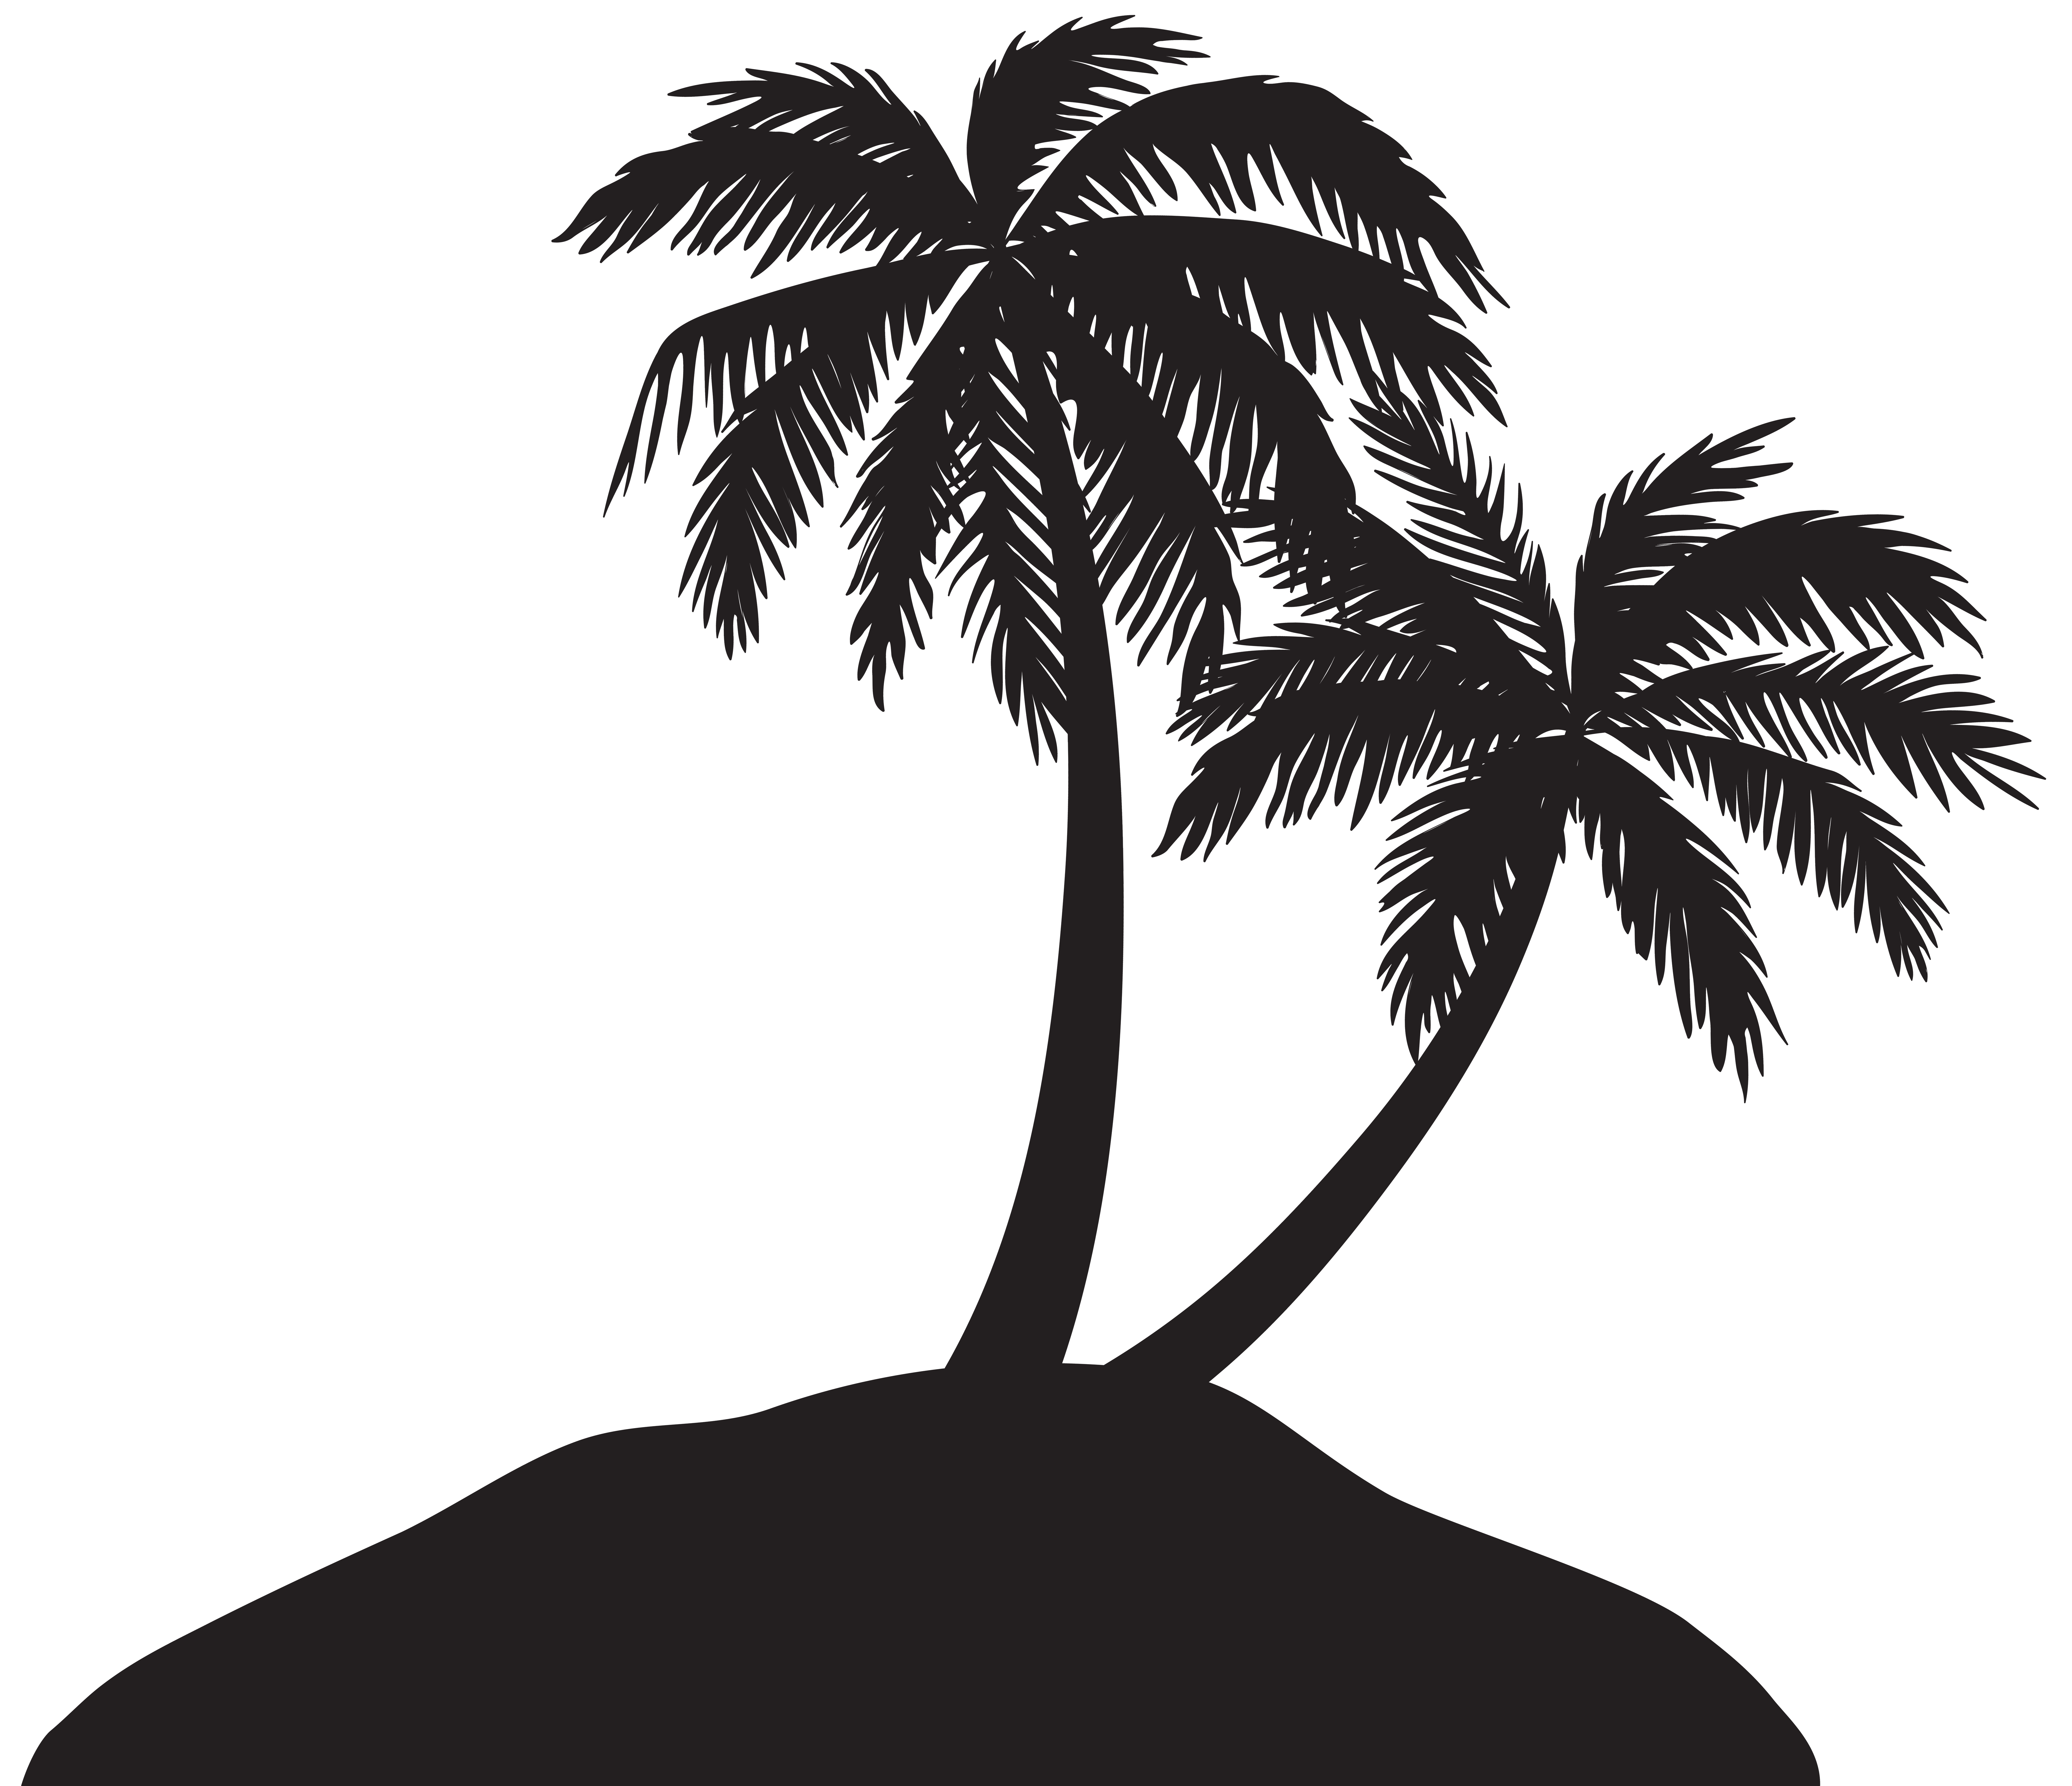 Cycle clipart tree growth. Island with palm trees